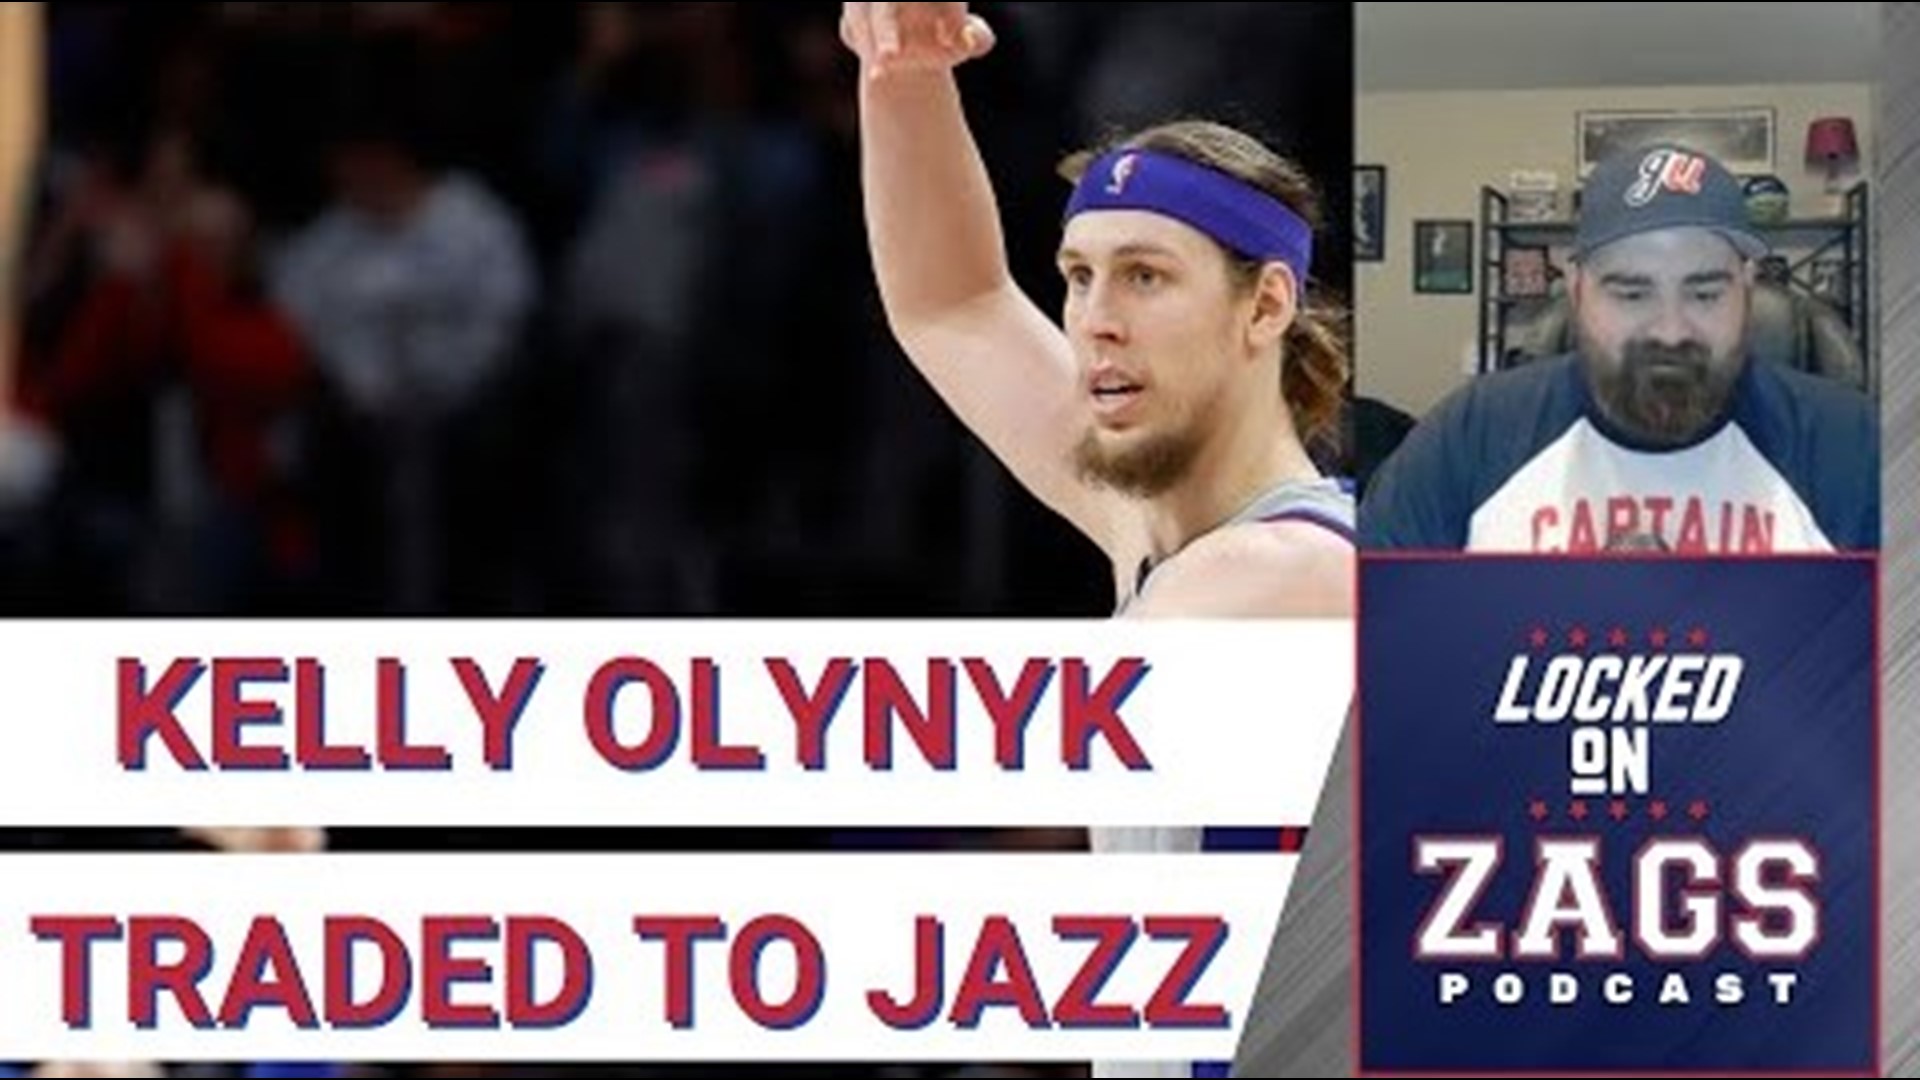 What's next for former Gonzaga Bulldog Kelly Olynyk, after he was traded from the Detroit Pistons to the Utah Jazz on Thursday in a deal for Bojan Bogdanovic.